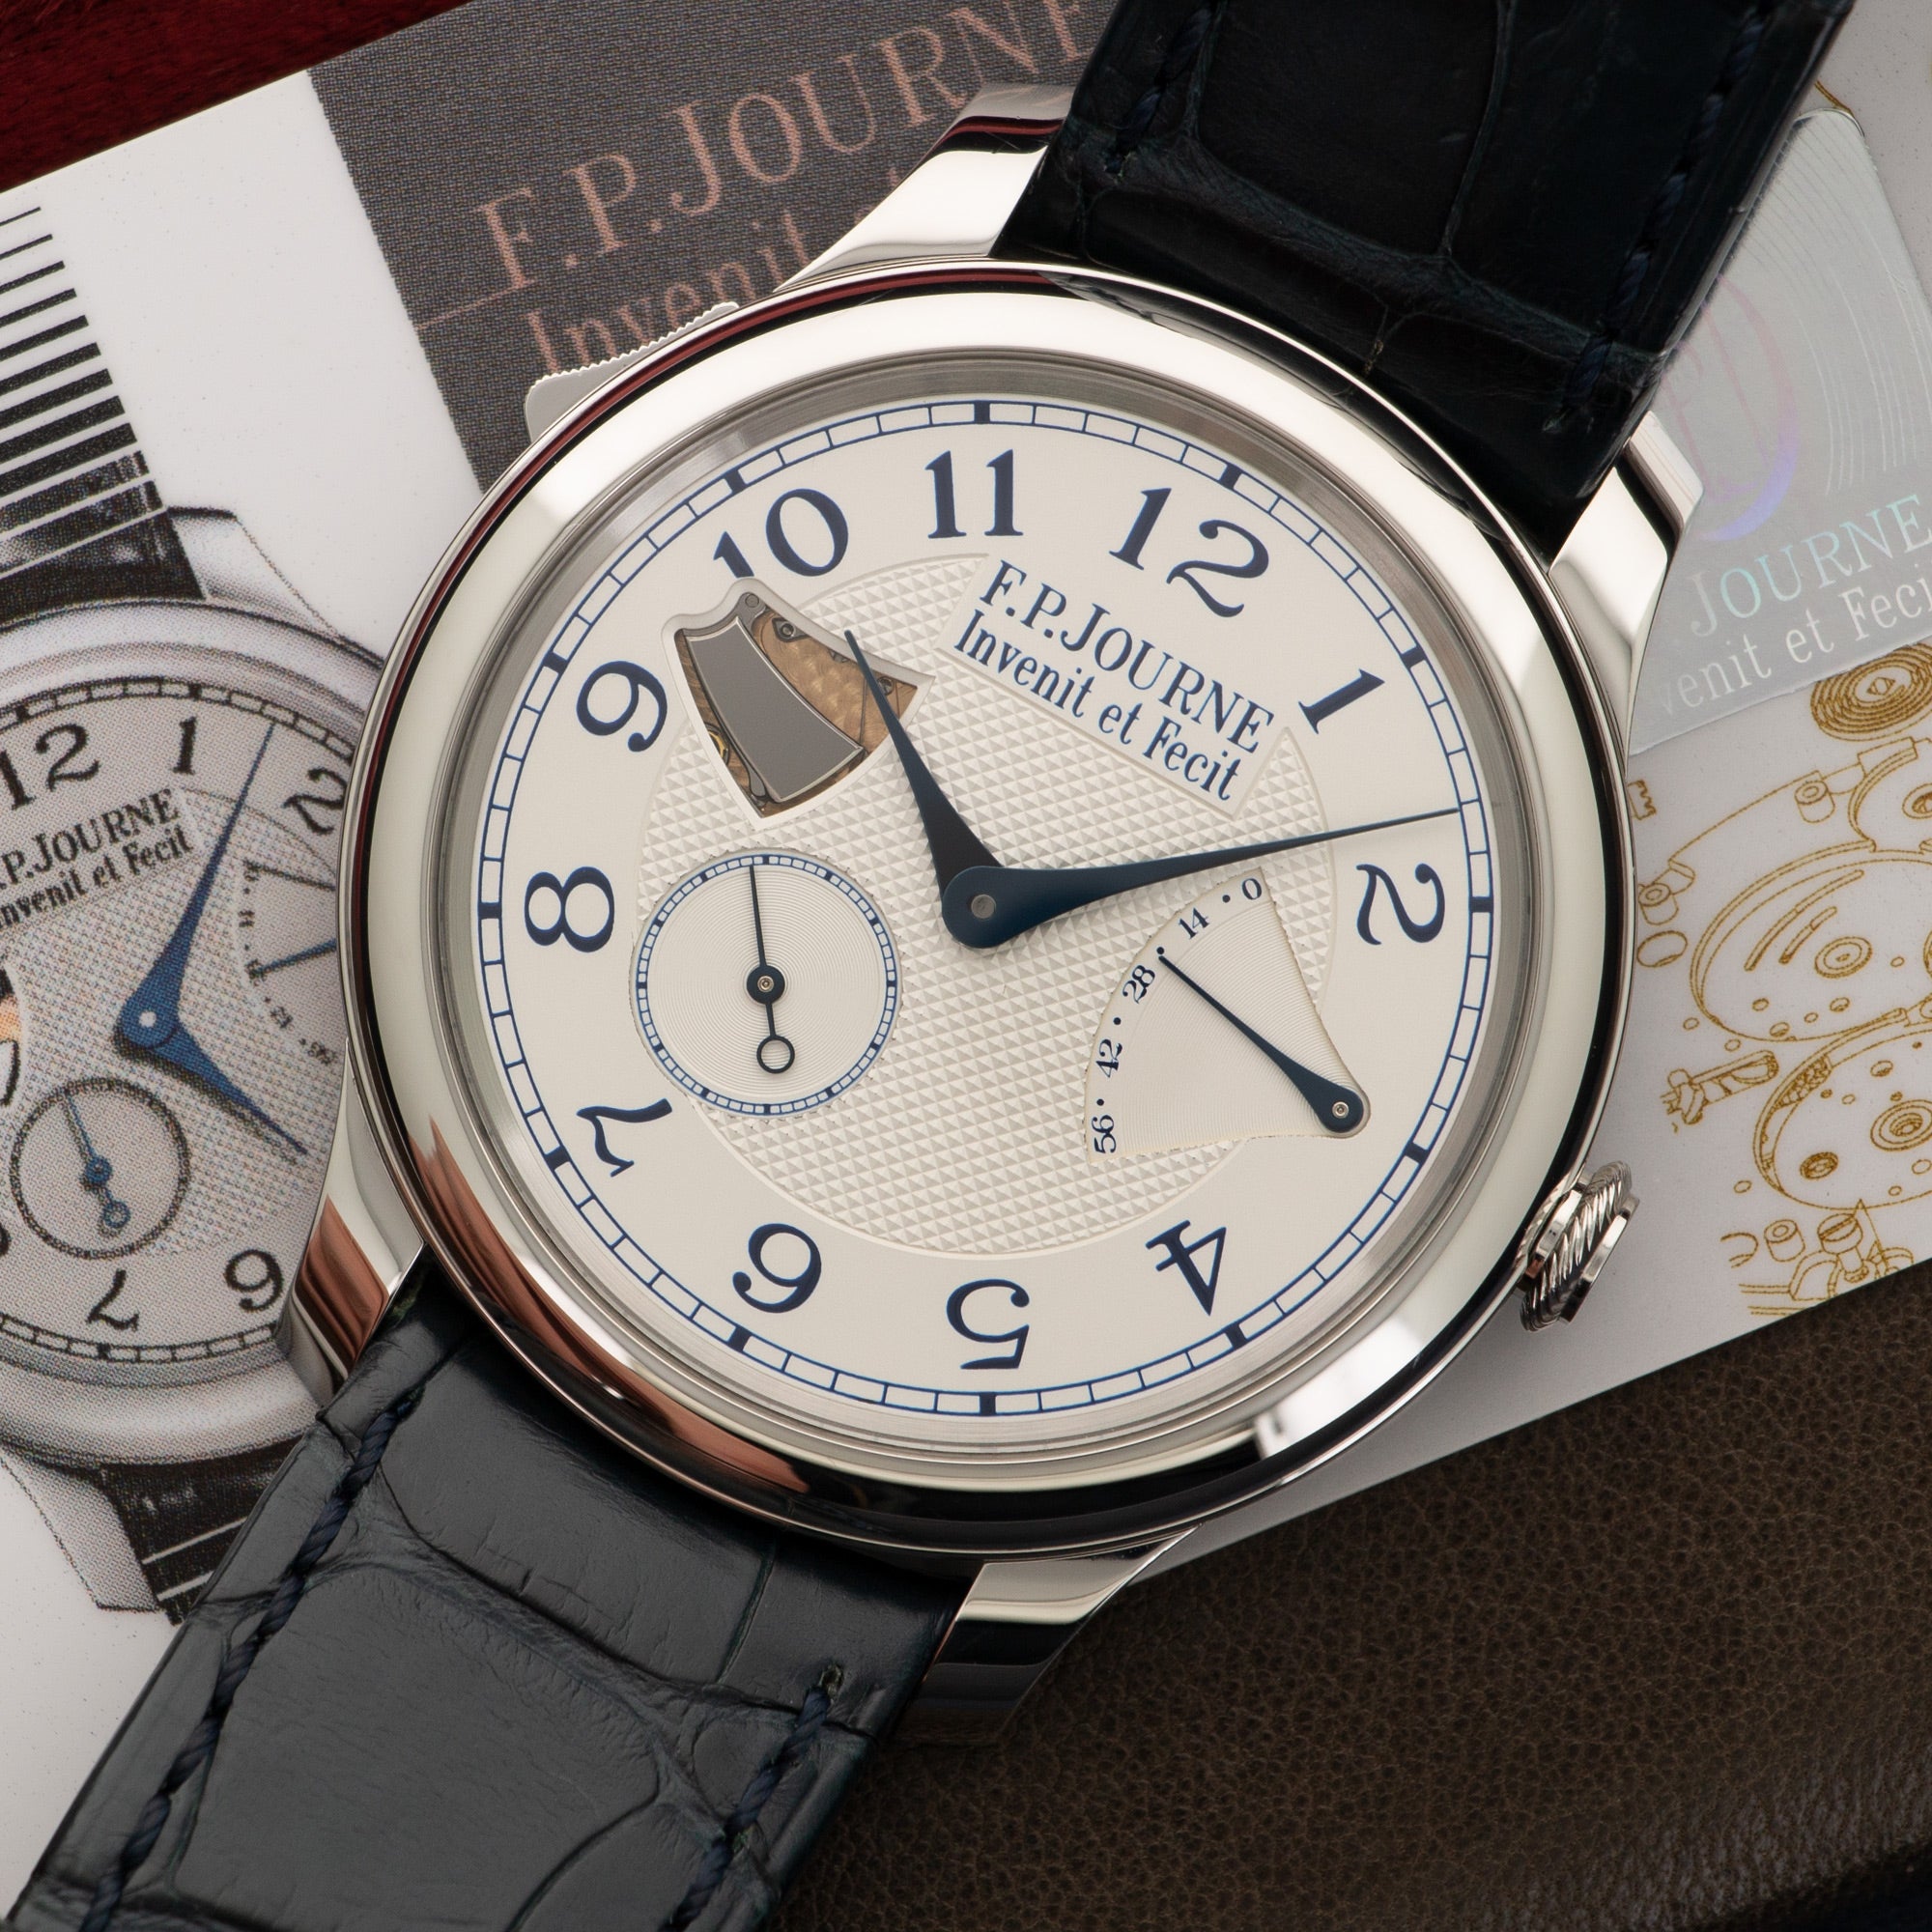 FP Journe - F.P. Journe Repetition Souveraine Minute Repeater Watch - The Keystone Watches